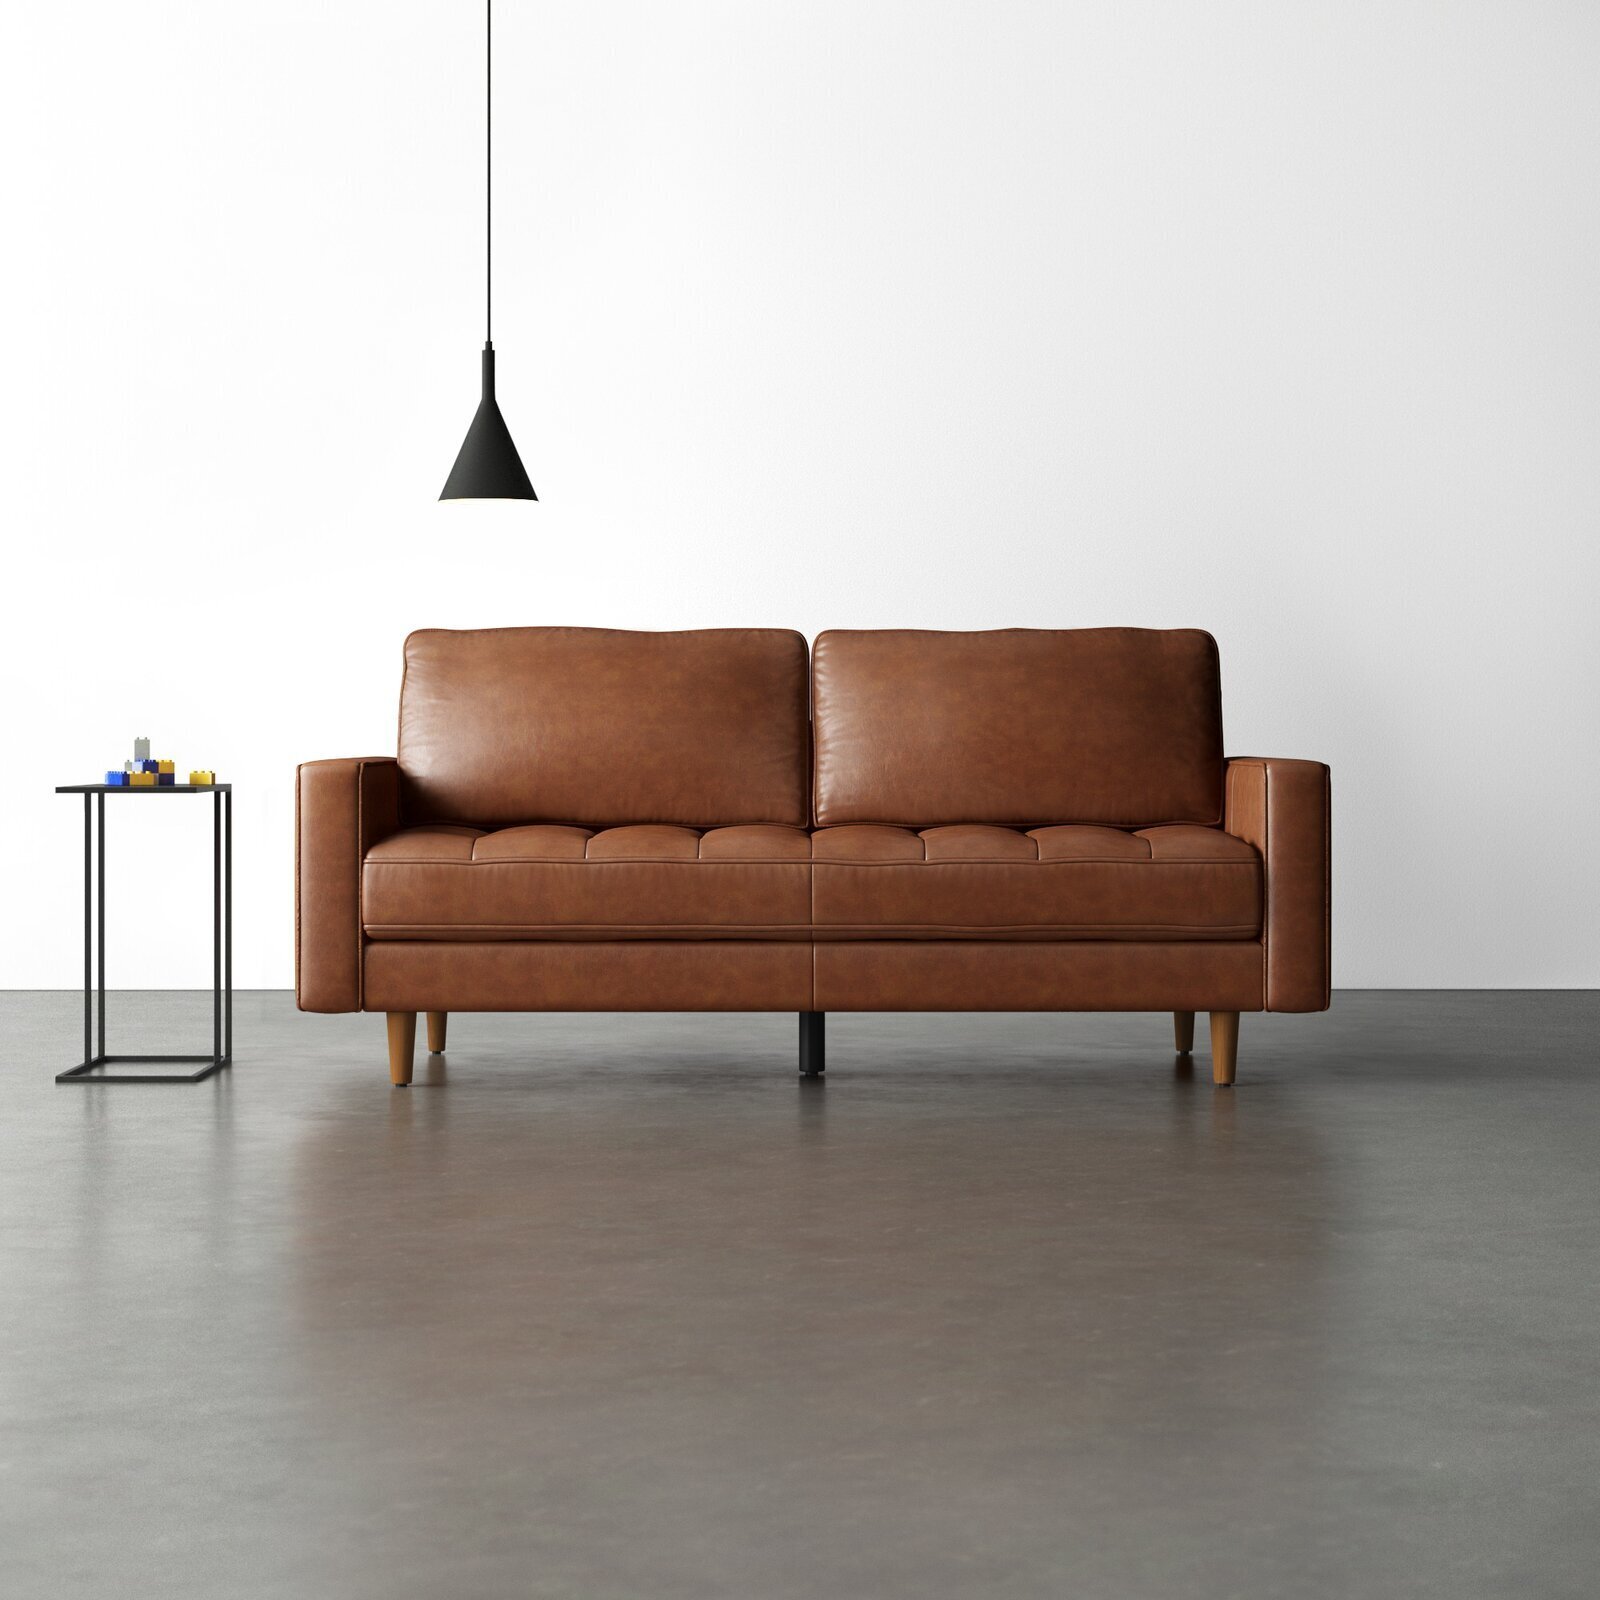 Leather couch with one cushion